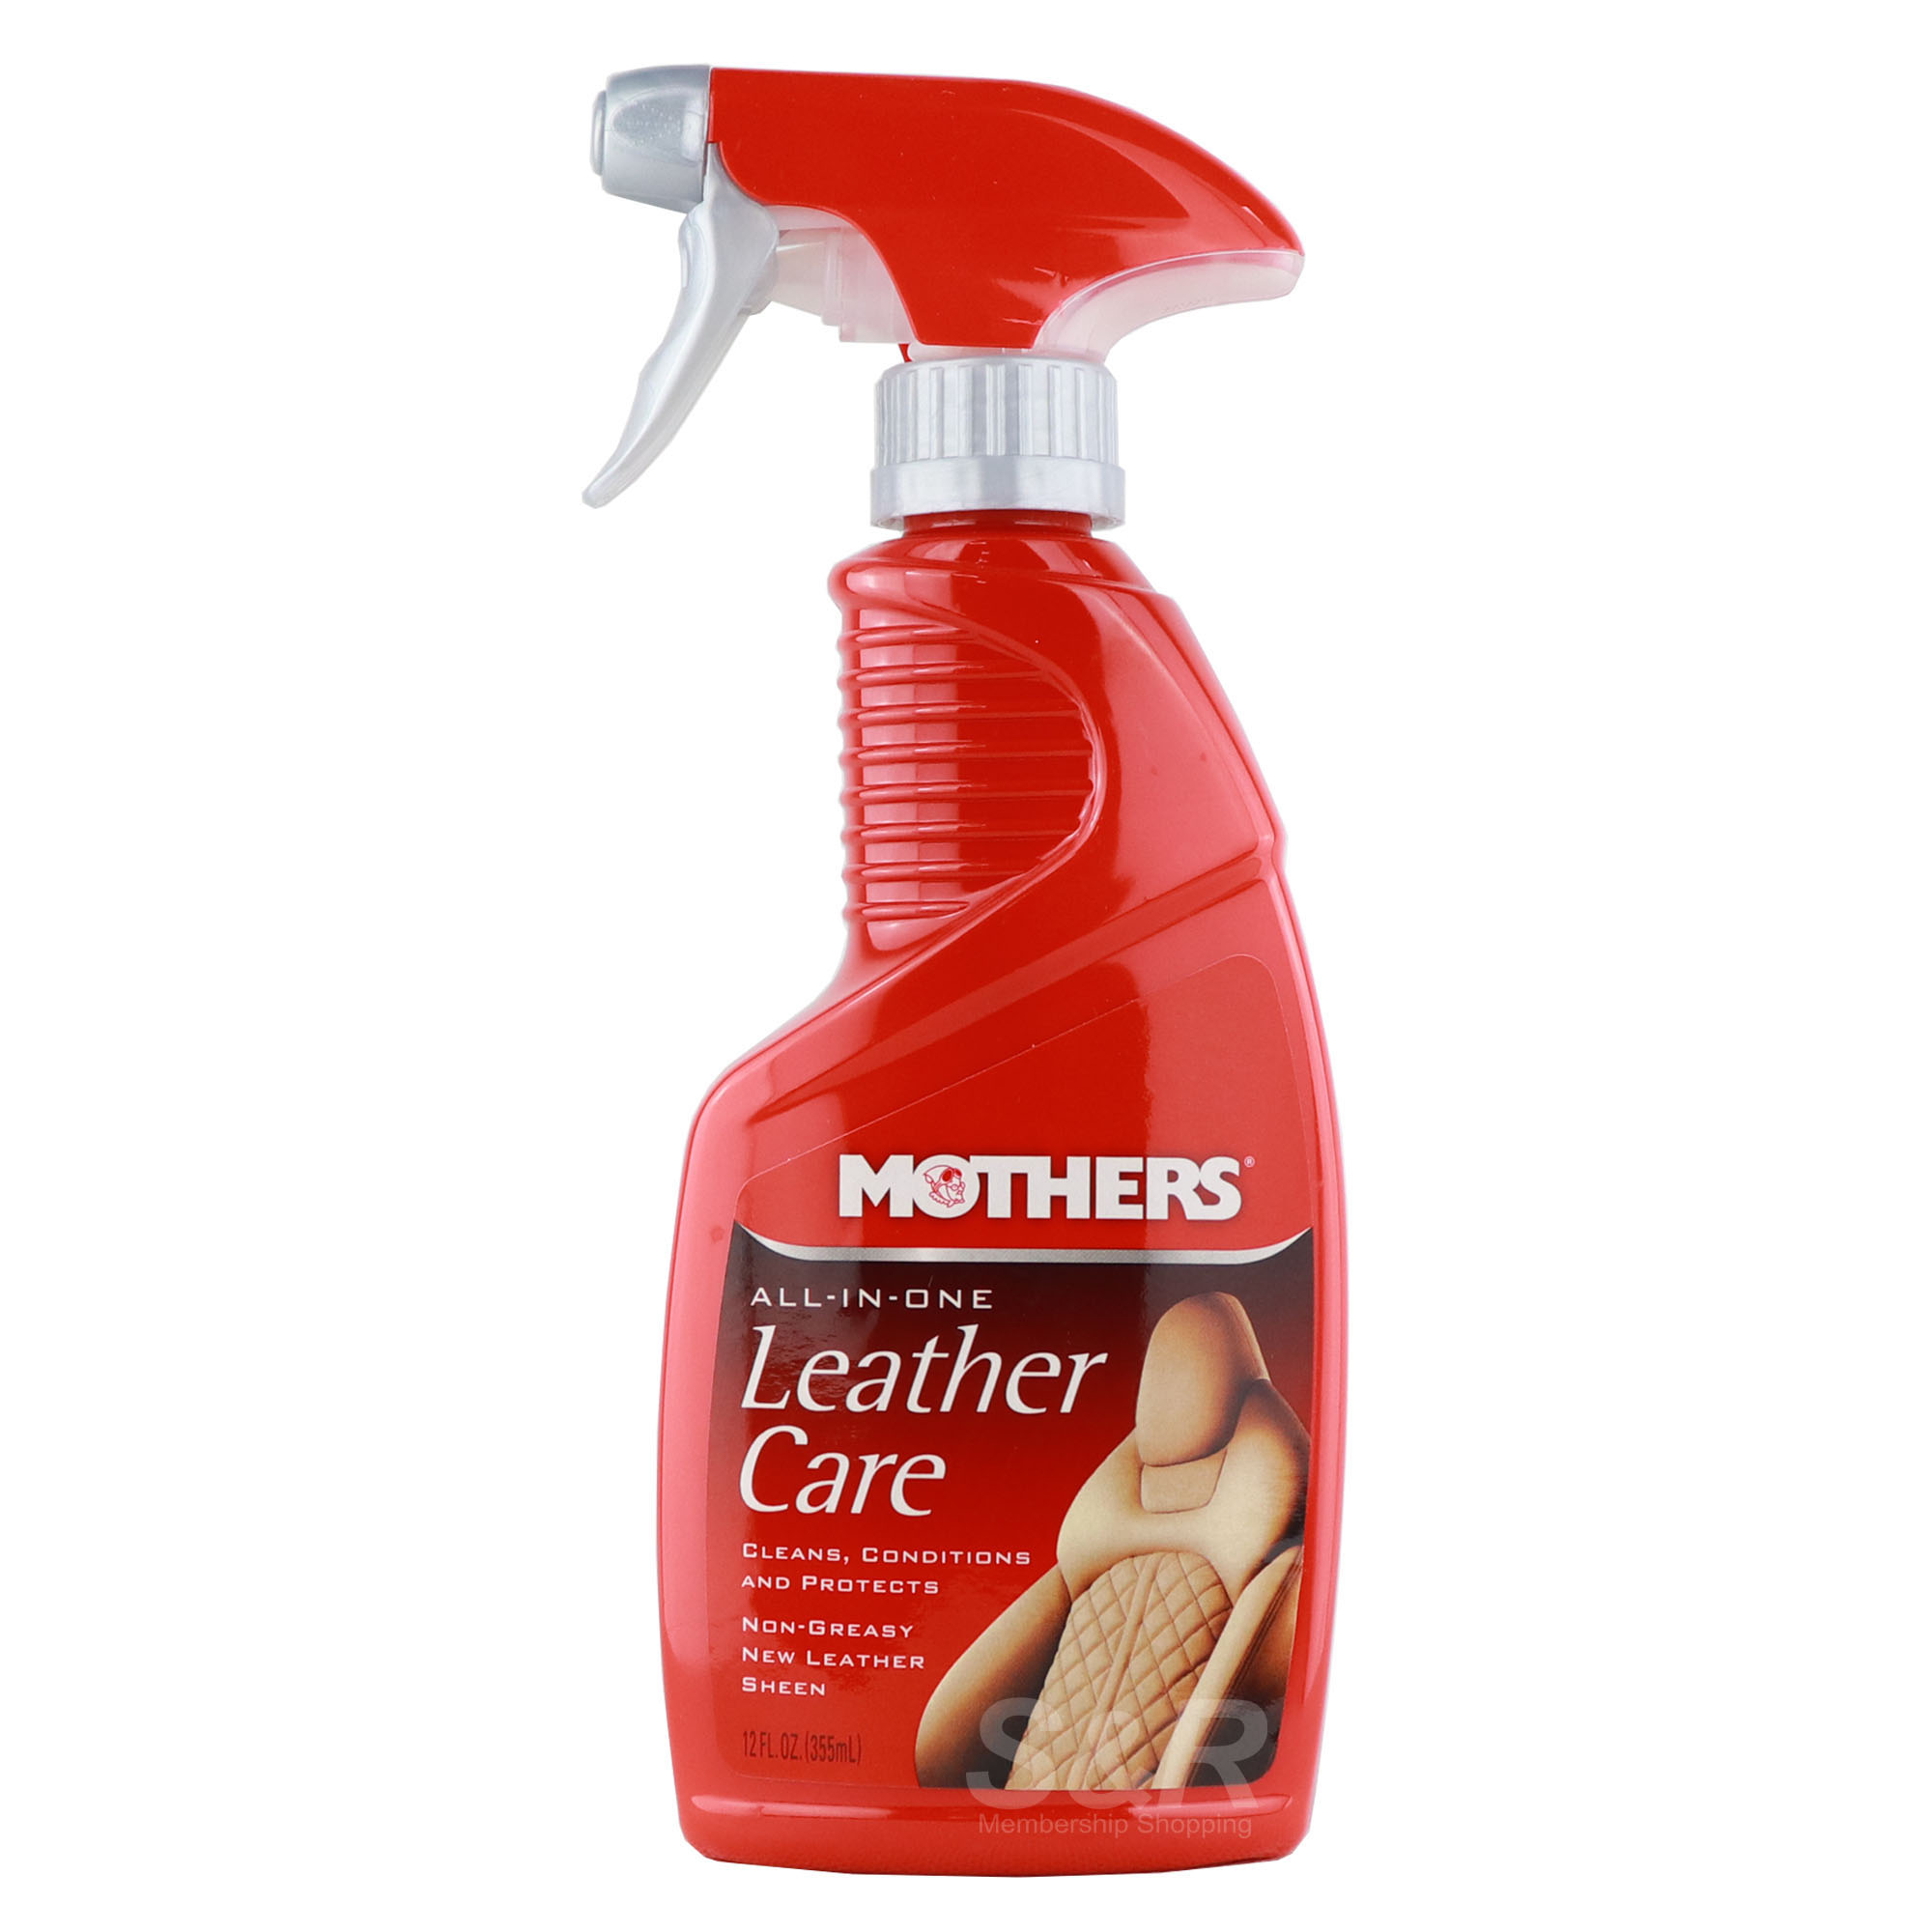 Mothers All-in-One Leather Care 355mL